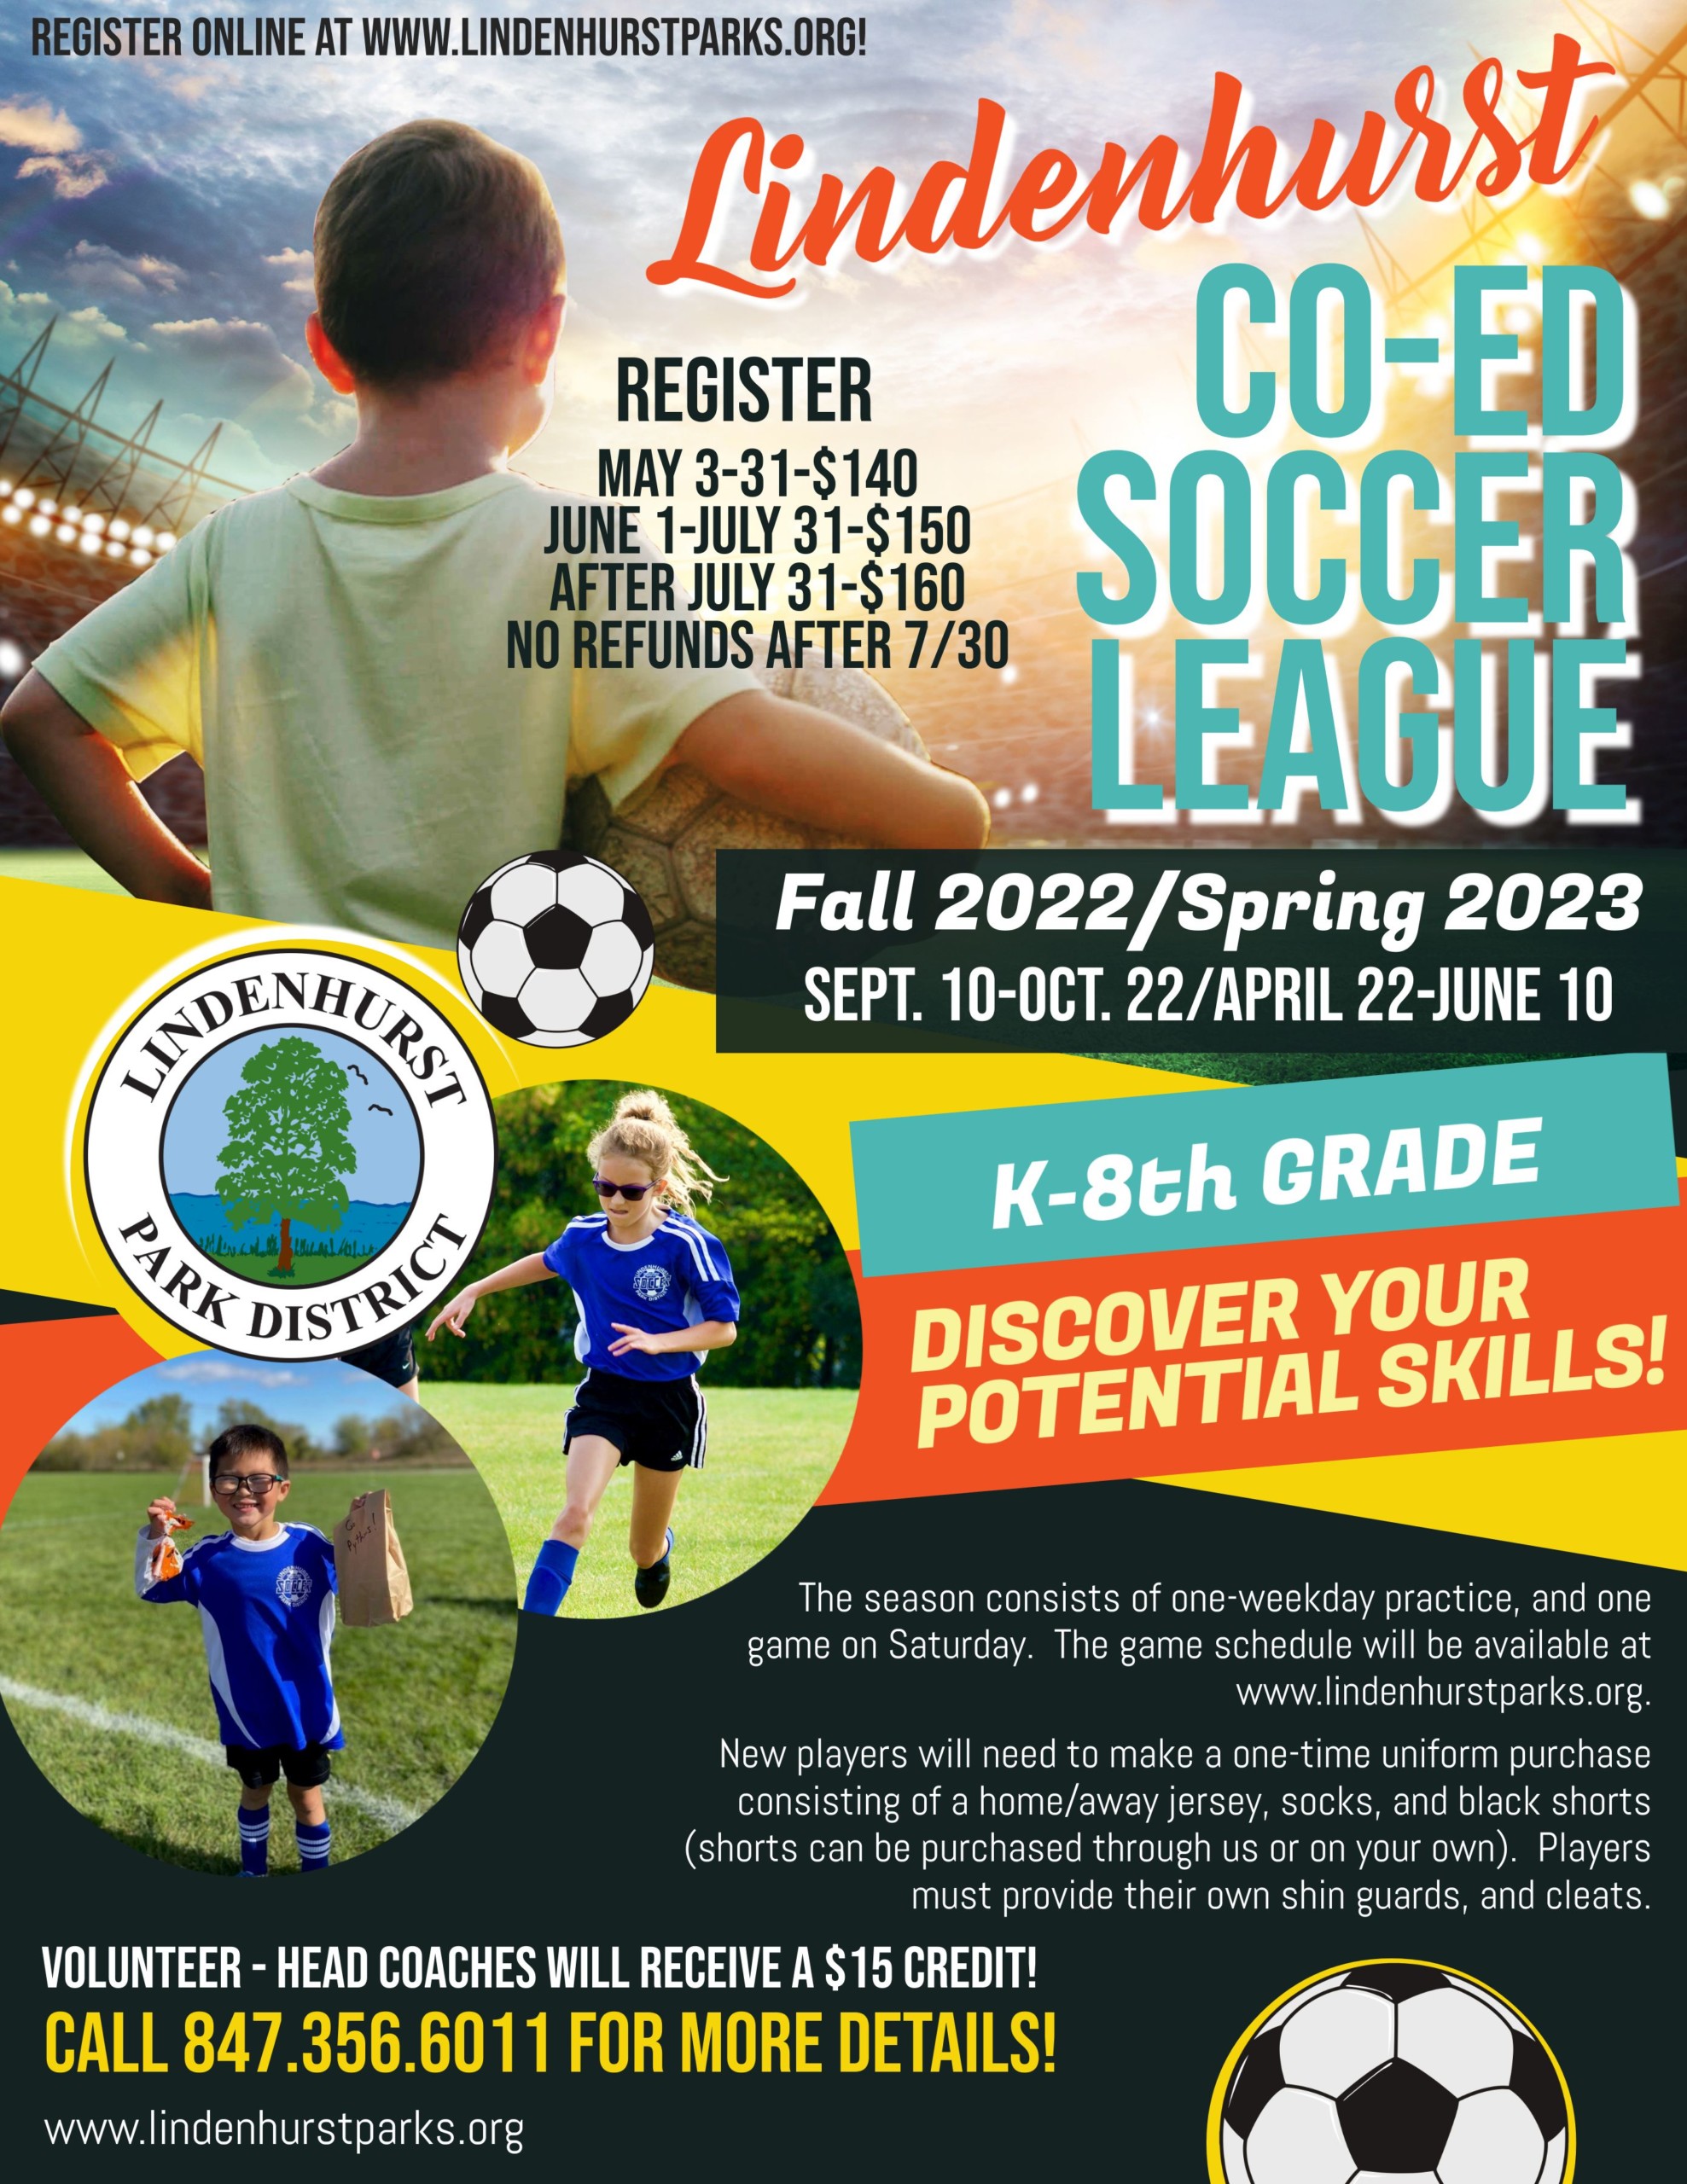 
An advertisement flyer for a co-ed soccer league organized by the Lindenhurst Park District. The top of the flyer features the park district's logo and a bright, eye-catching title stating "Lindenhurst Co-Ed Soccer League." A photo of a young boy looking out onto a soccer field occupies the upper left side, with sunlight beaming through the stadium. Below, two smaller photos show children playing soccer, wearing blue jerseys. The text provides information about registration dates and fees, which vary depending on the date of registration. Details about the league's season for Fall 2022/Spring 2023 are highlighted, along with age groups from Kindergarten to 8th grade. The flyer encourages players to "Discover Your Potential Skills!" and mentions the weekly structure of practices and games. It notes the necessity for new players to buy a uniform and advises that head coaches volunteering will receive a credit. Contact information and the website are provided for more details. The design uses vibrant colors and soccer-related imagery to attract and inform potential participants